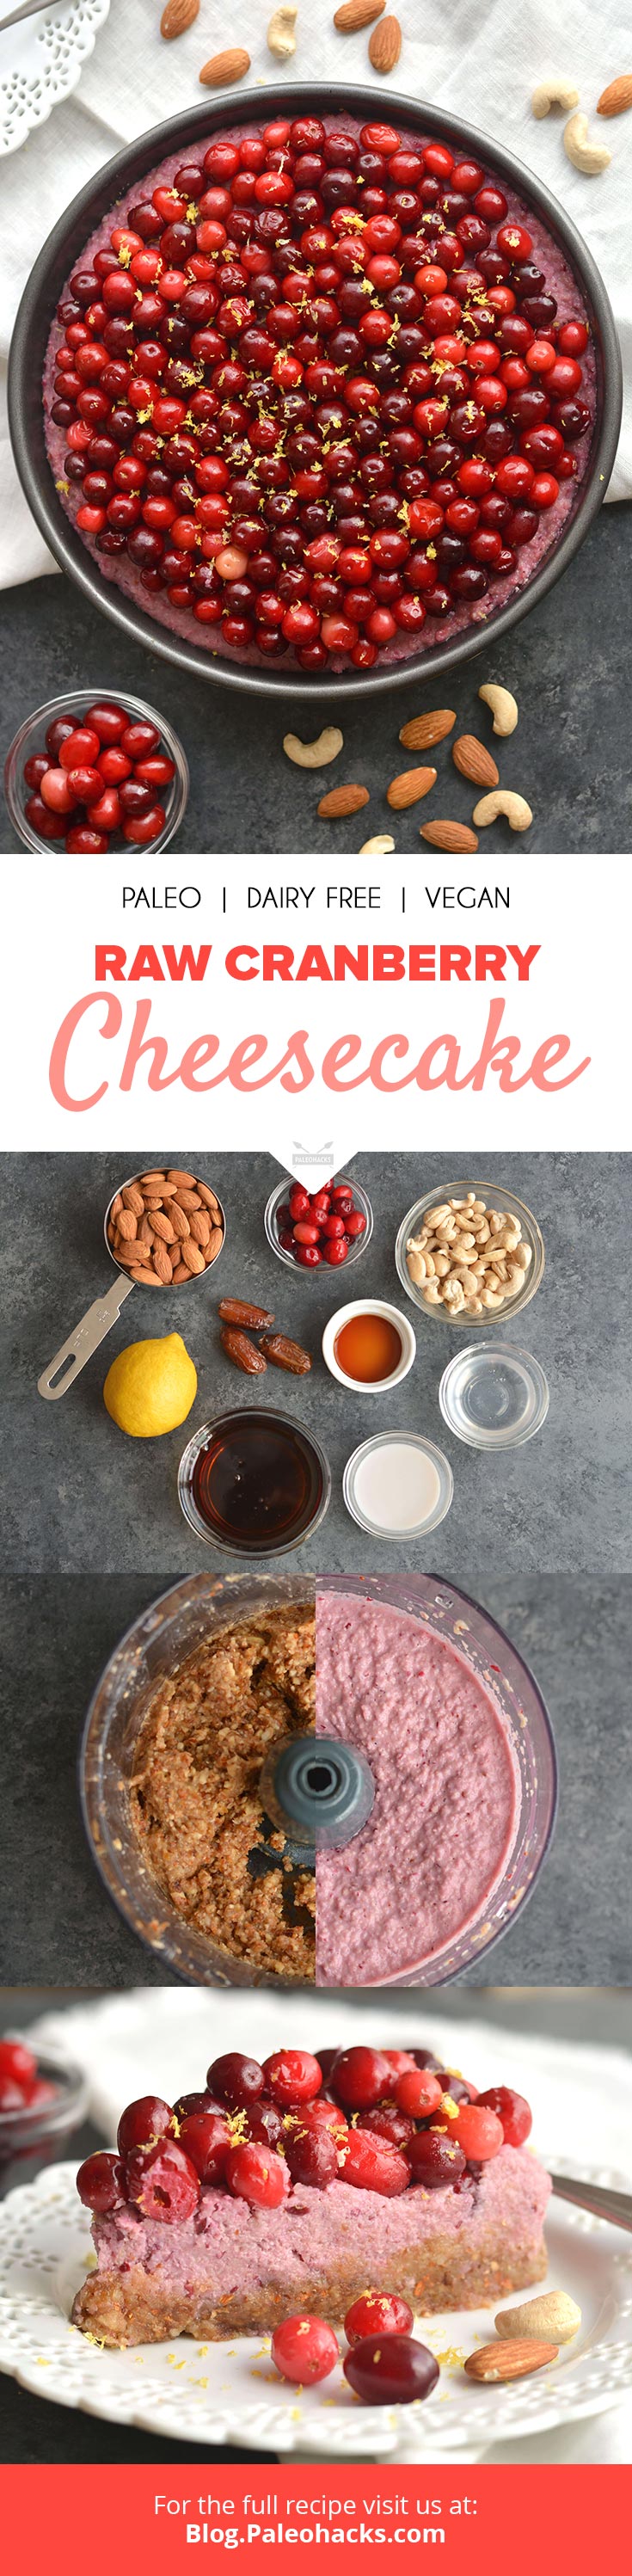 Dazzle your holiday table with this cranberry-studded, no-bake cake! Celebrate autumn with this easy, raw and dairy-free cranberry cheesecake.